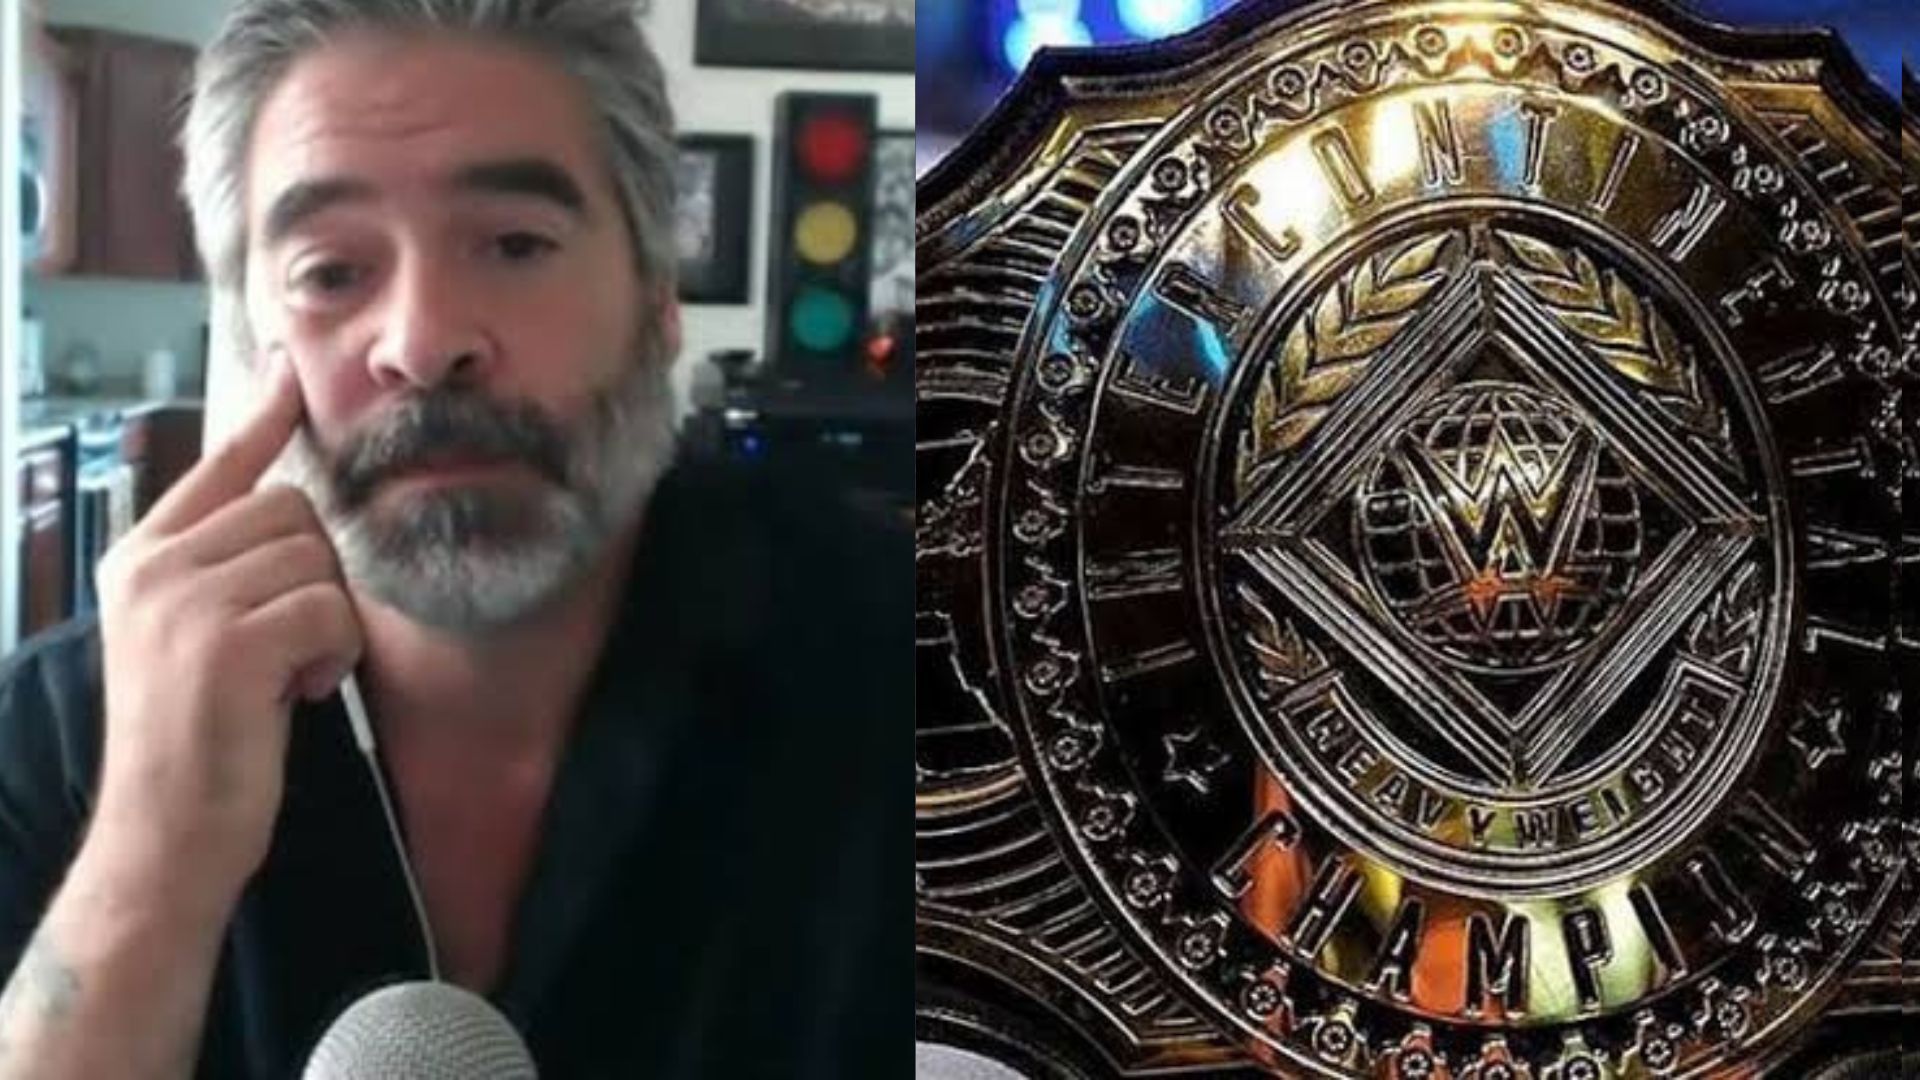 Vince Russo on his heat with Lance Storm.